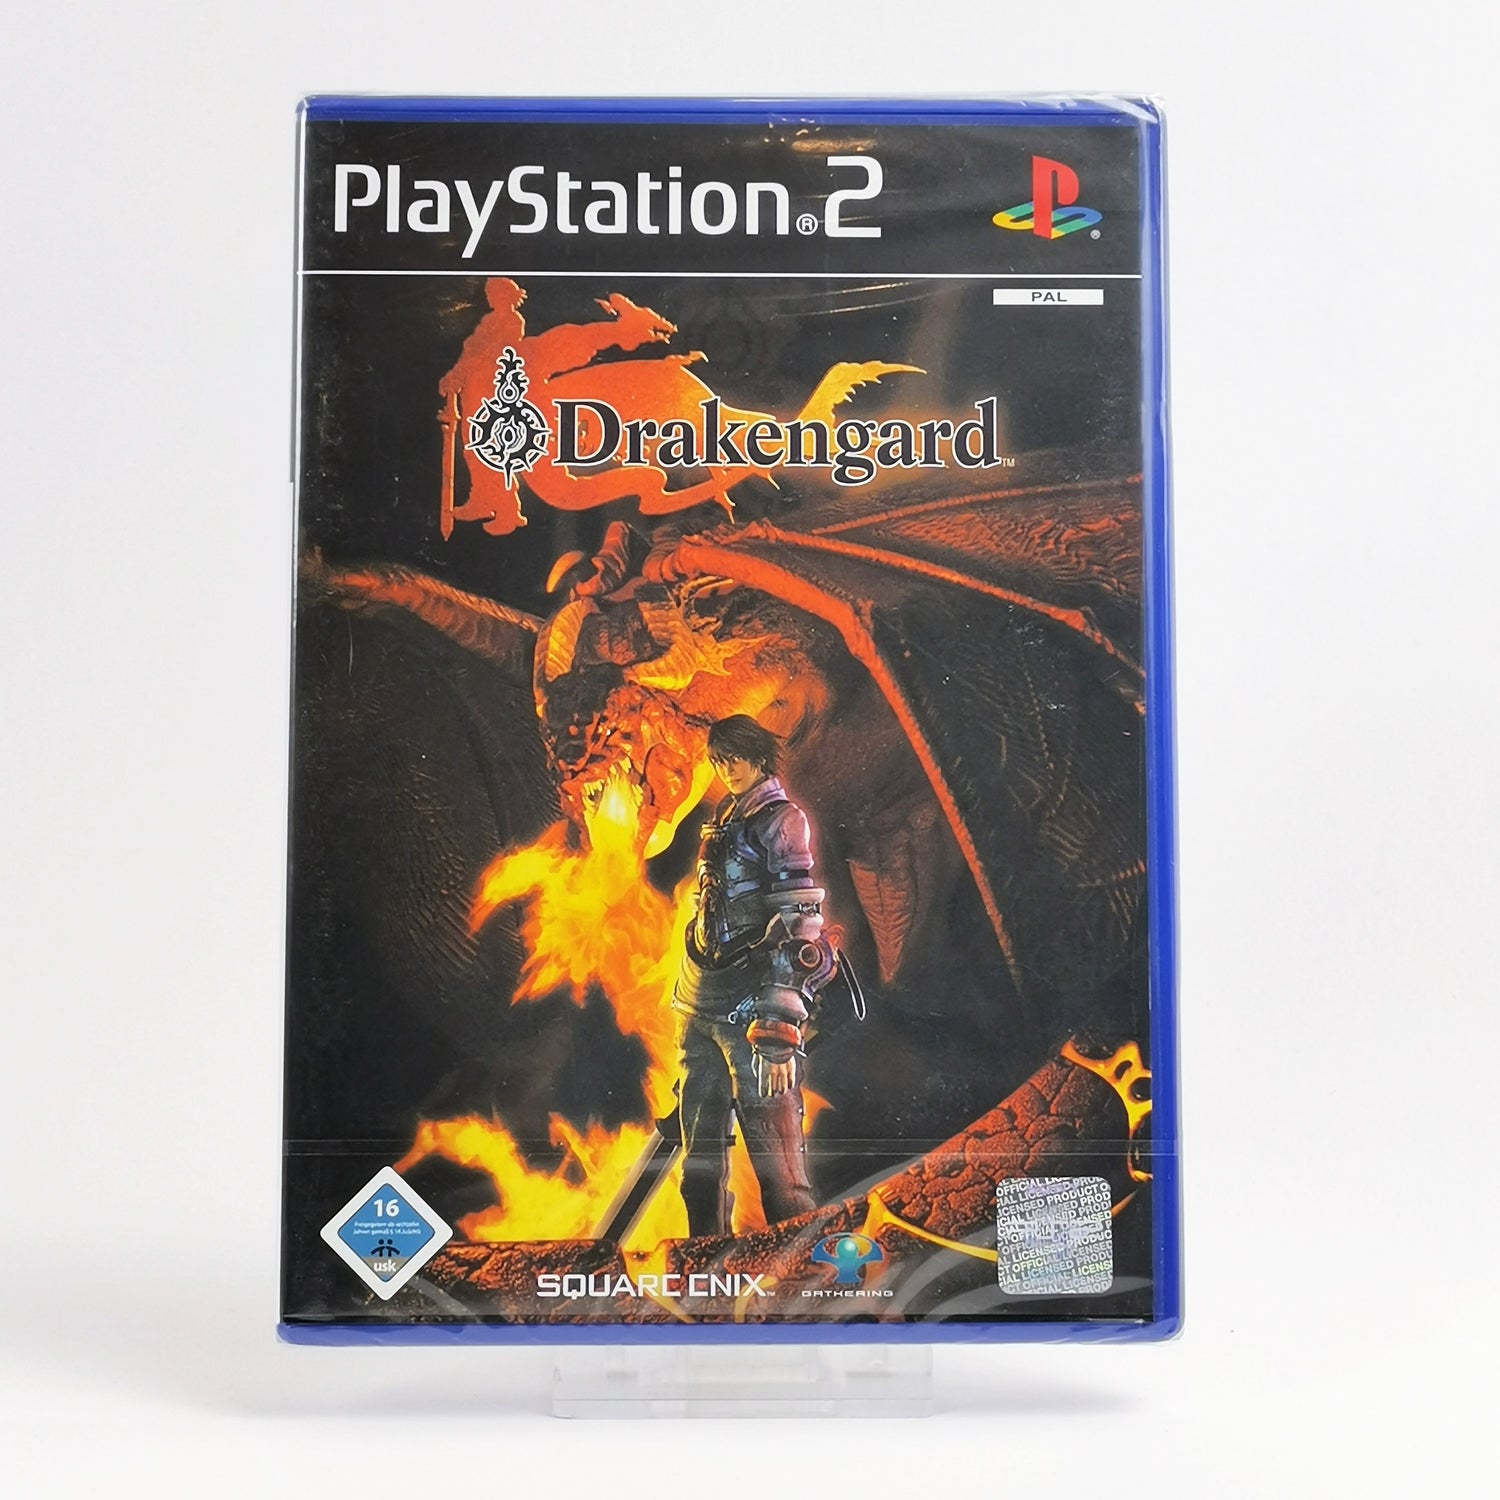 Sony Playstation 2 Game : Drakengard - Square Enix | PS2 OVP PAL - NEW SEALED